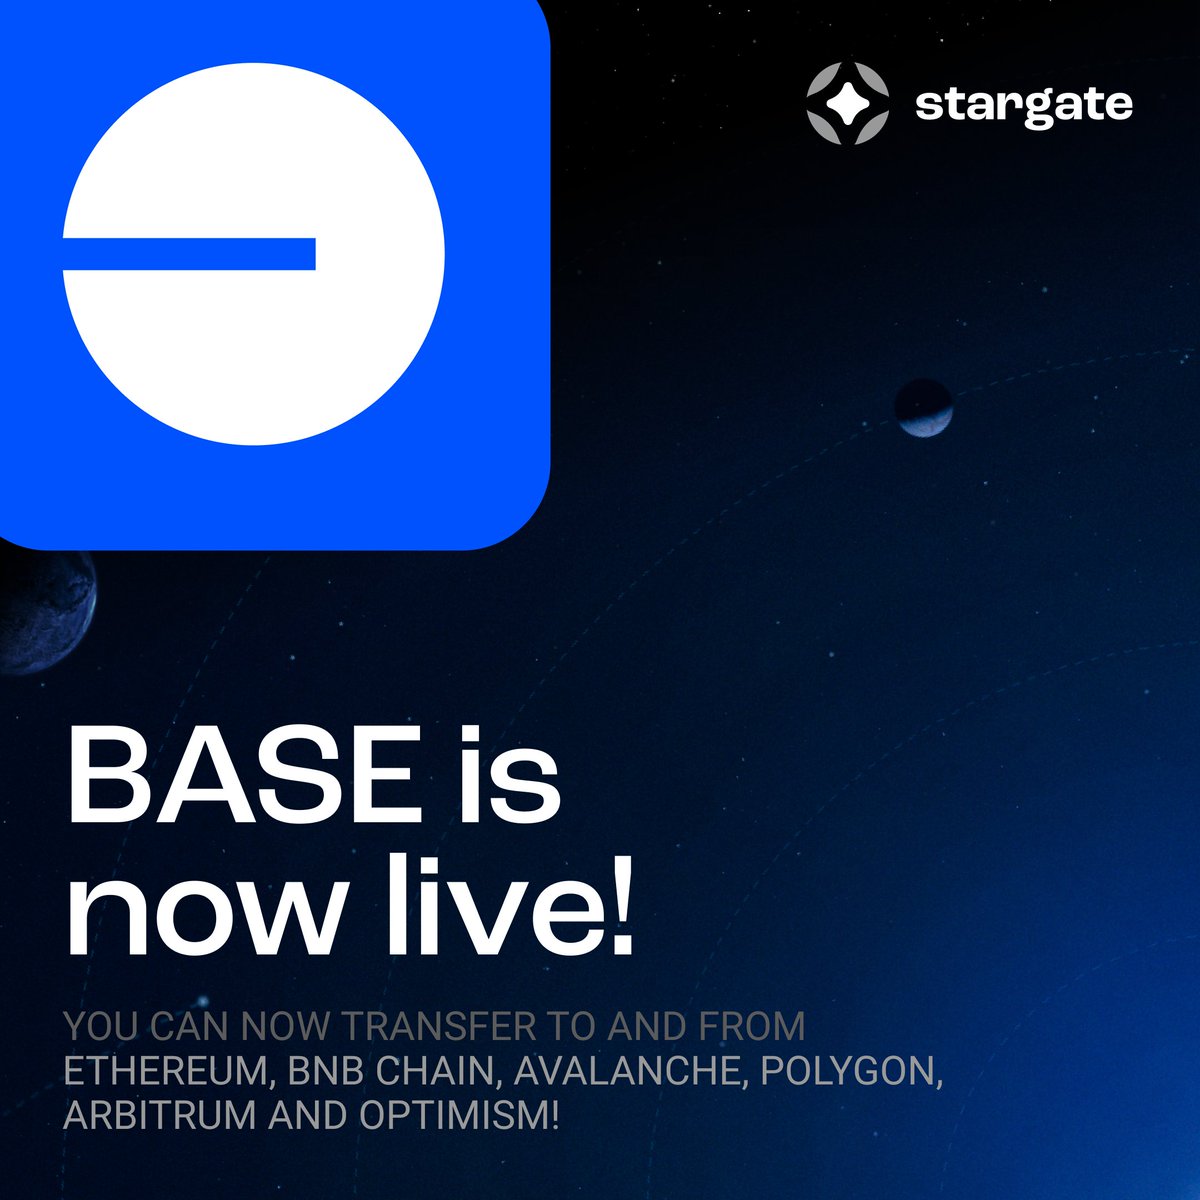 Stargate is excited to announce it's deployment to a new ecosystem: @BuildOnBase 🔵 You can now be one of the first to access $USDC and $ETH liquidity on Base Mainnet! Bridge to and from all of the supported networks below at: stargate.finance/transfer